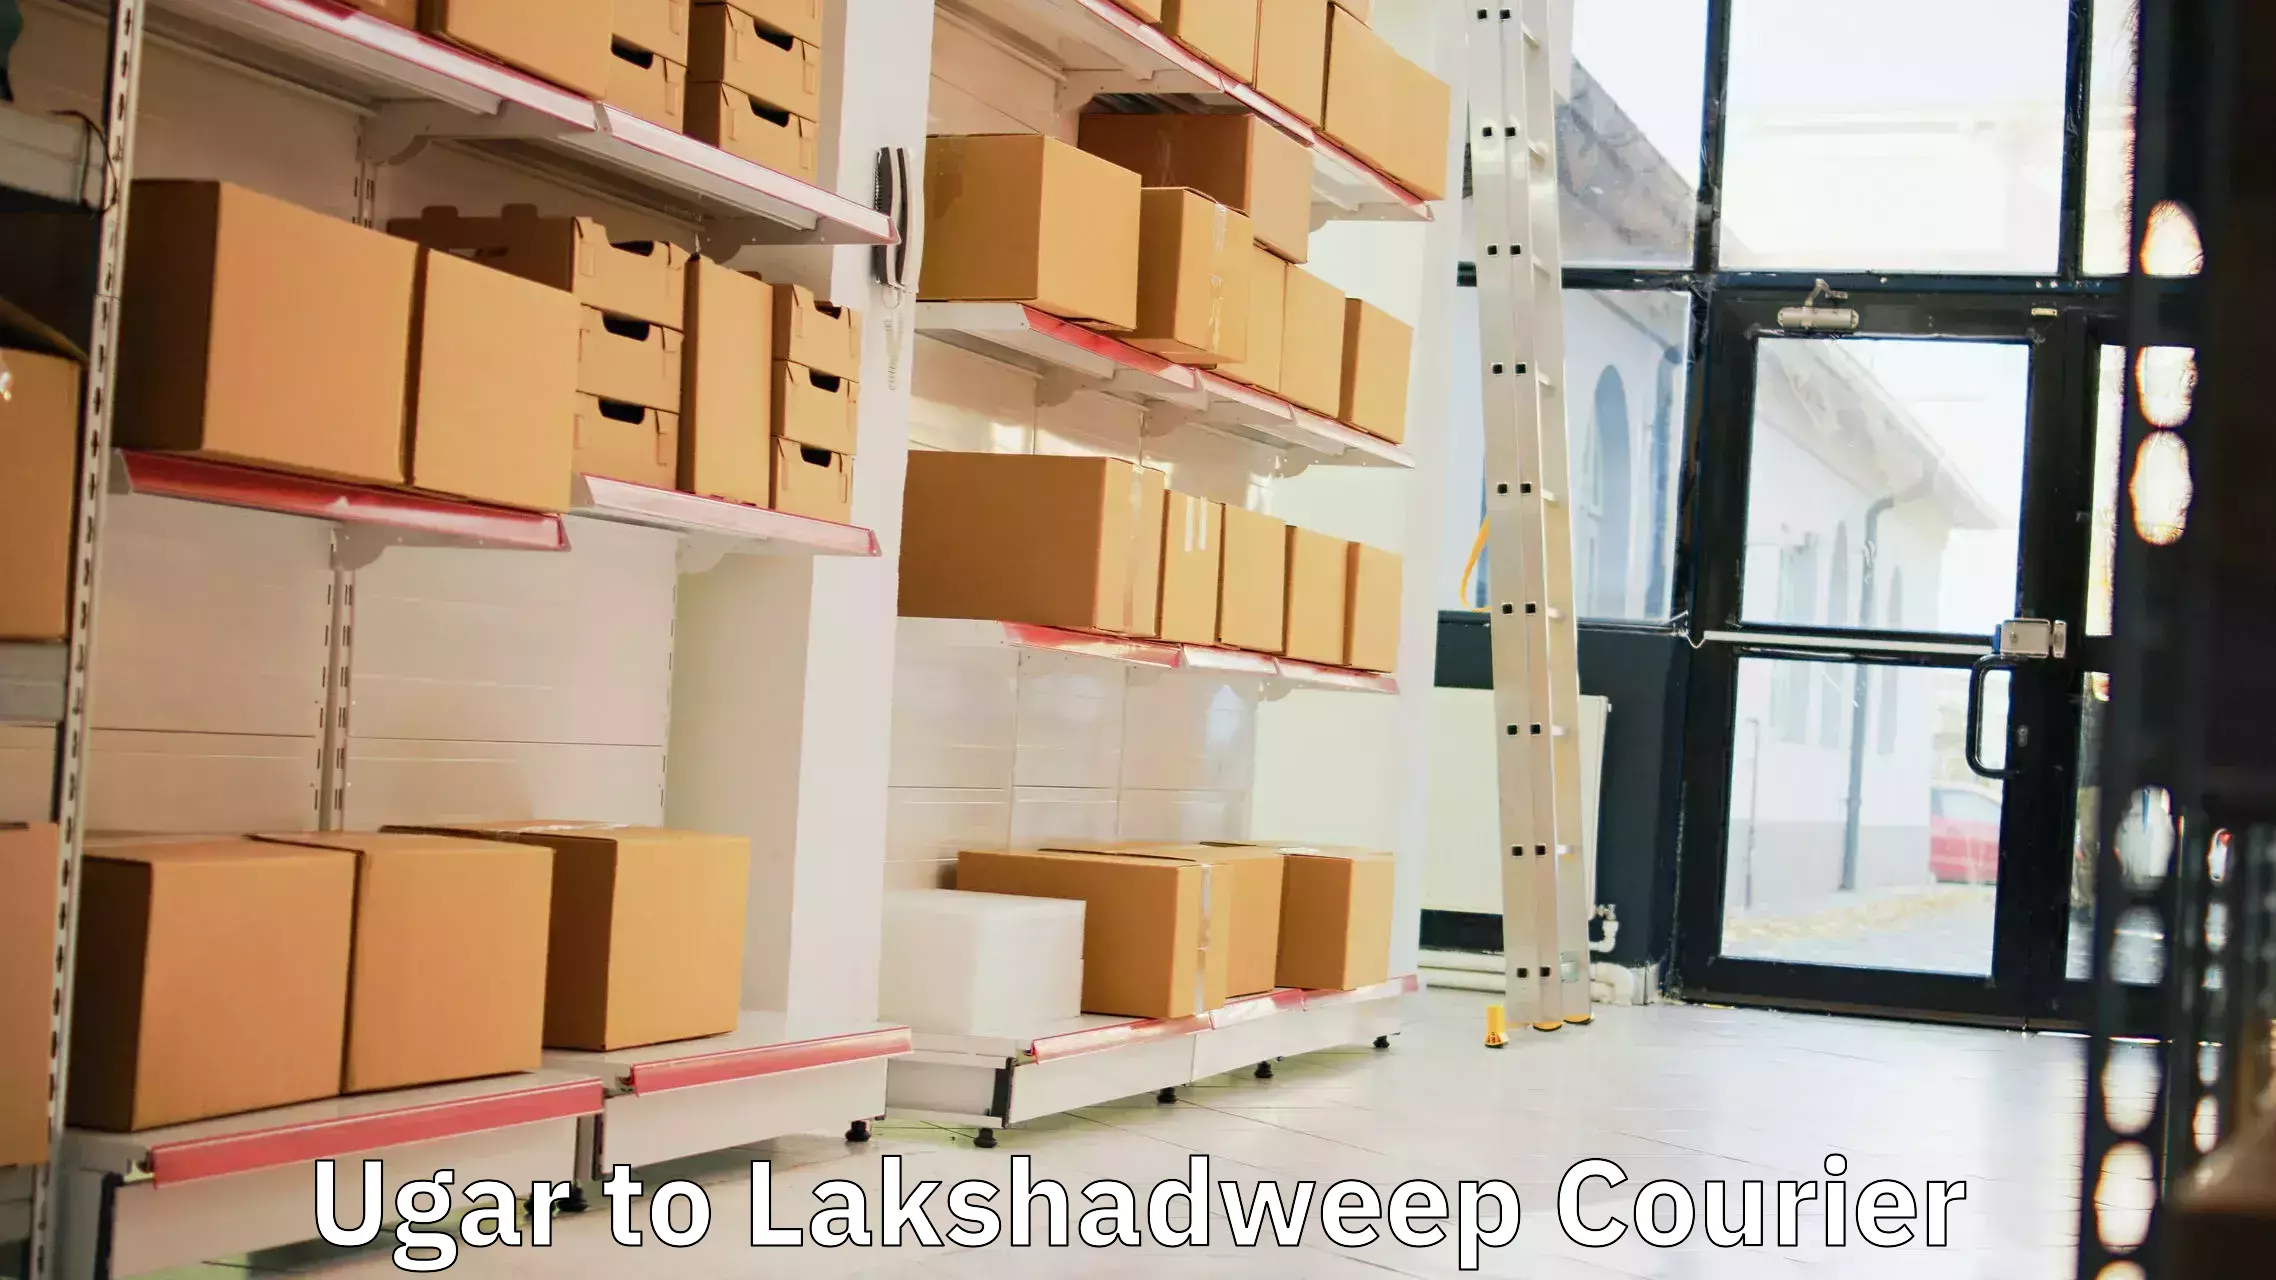 Customizable delivery plans Ugar to Lakshadweep